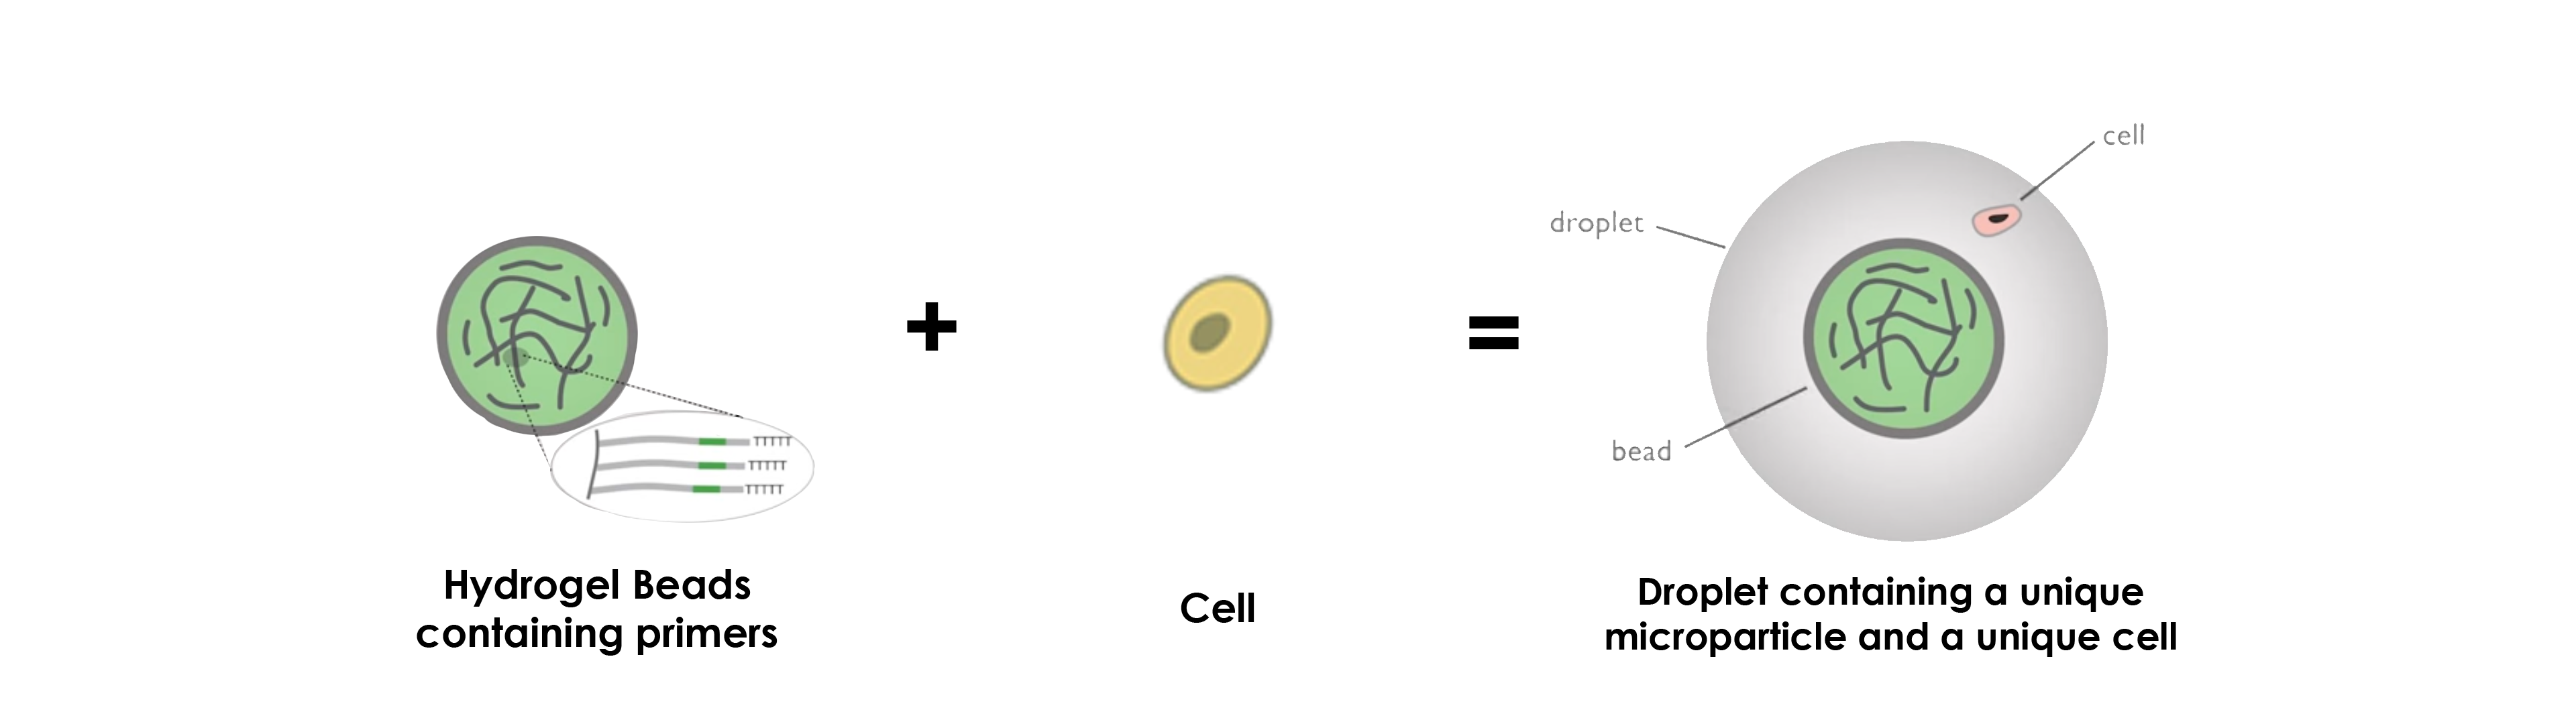 hydrogel-beads-microparticles-drop-seq-microfluidics-single-cells-analysis-ARN-AND-barcode-complex-tissue